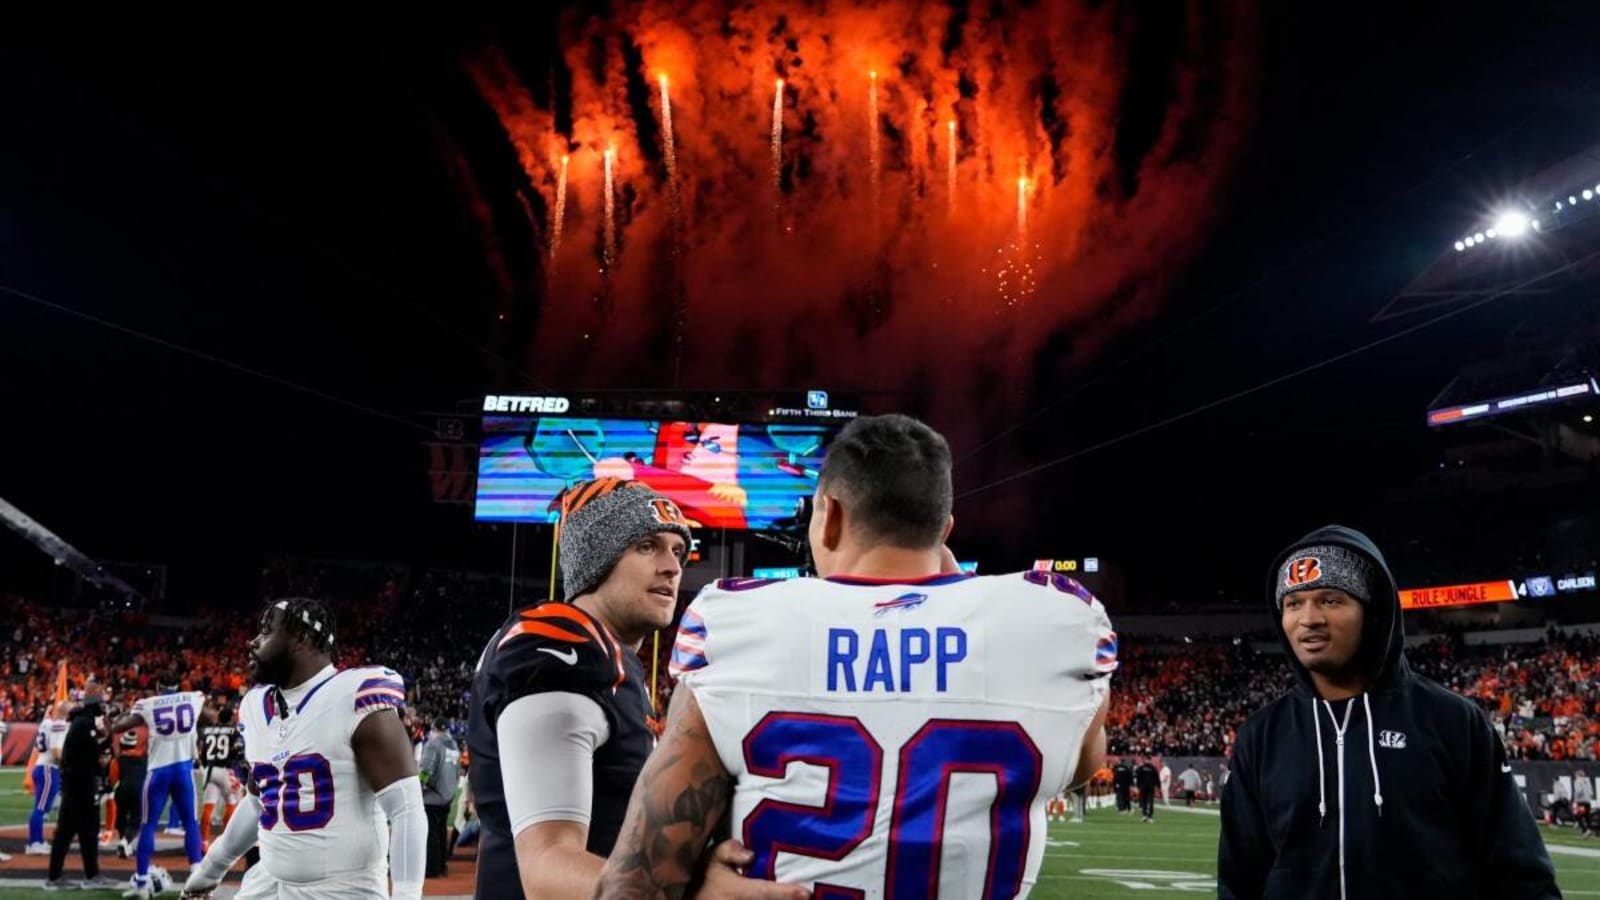 Bills Sign Rapp to Contract Extension